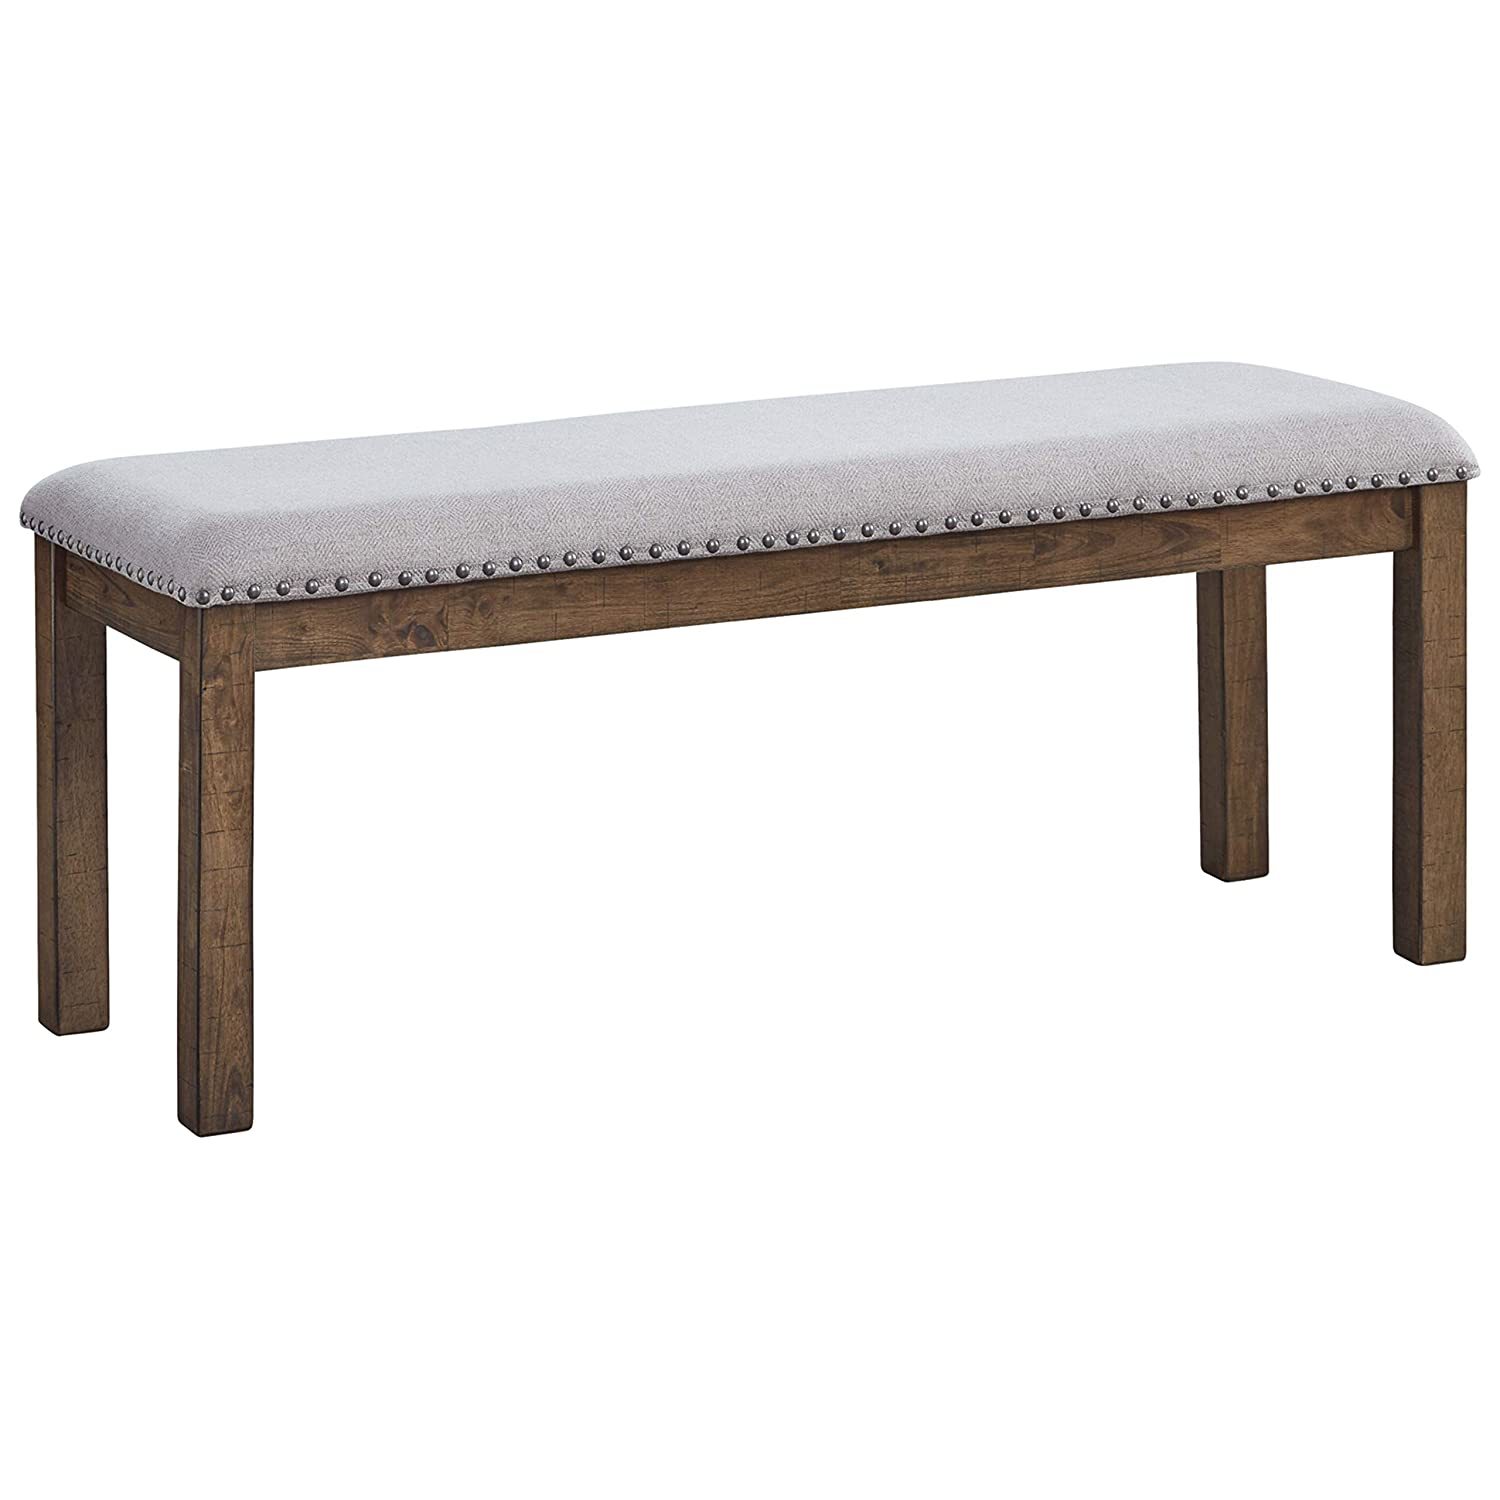 Signature Design by Ashley Moriville Casual Rustic Upholstered Dining Bench, Bei - $172.99